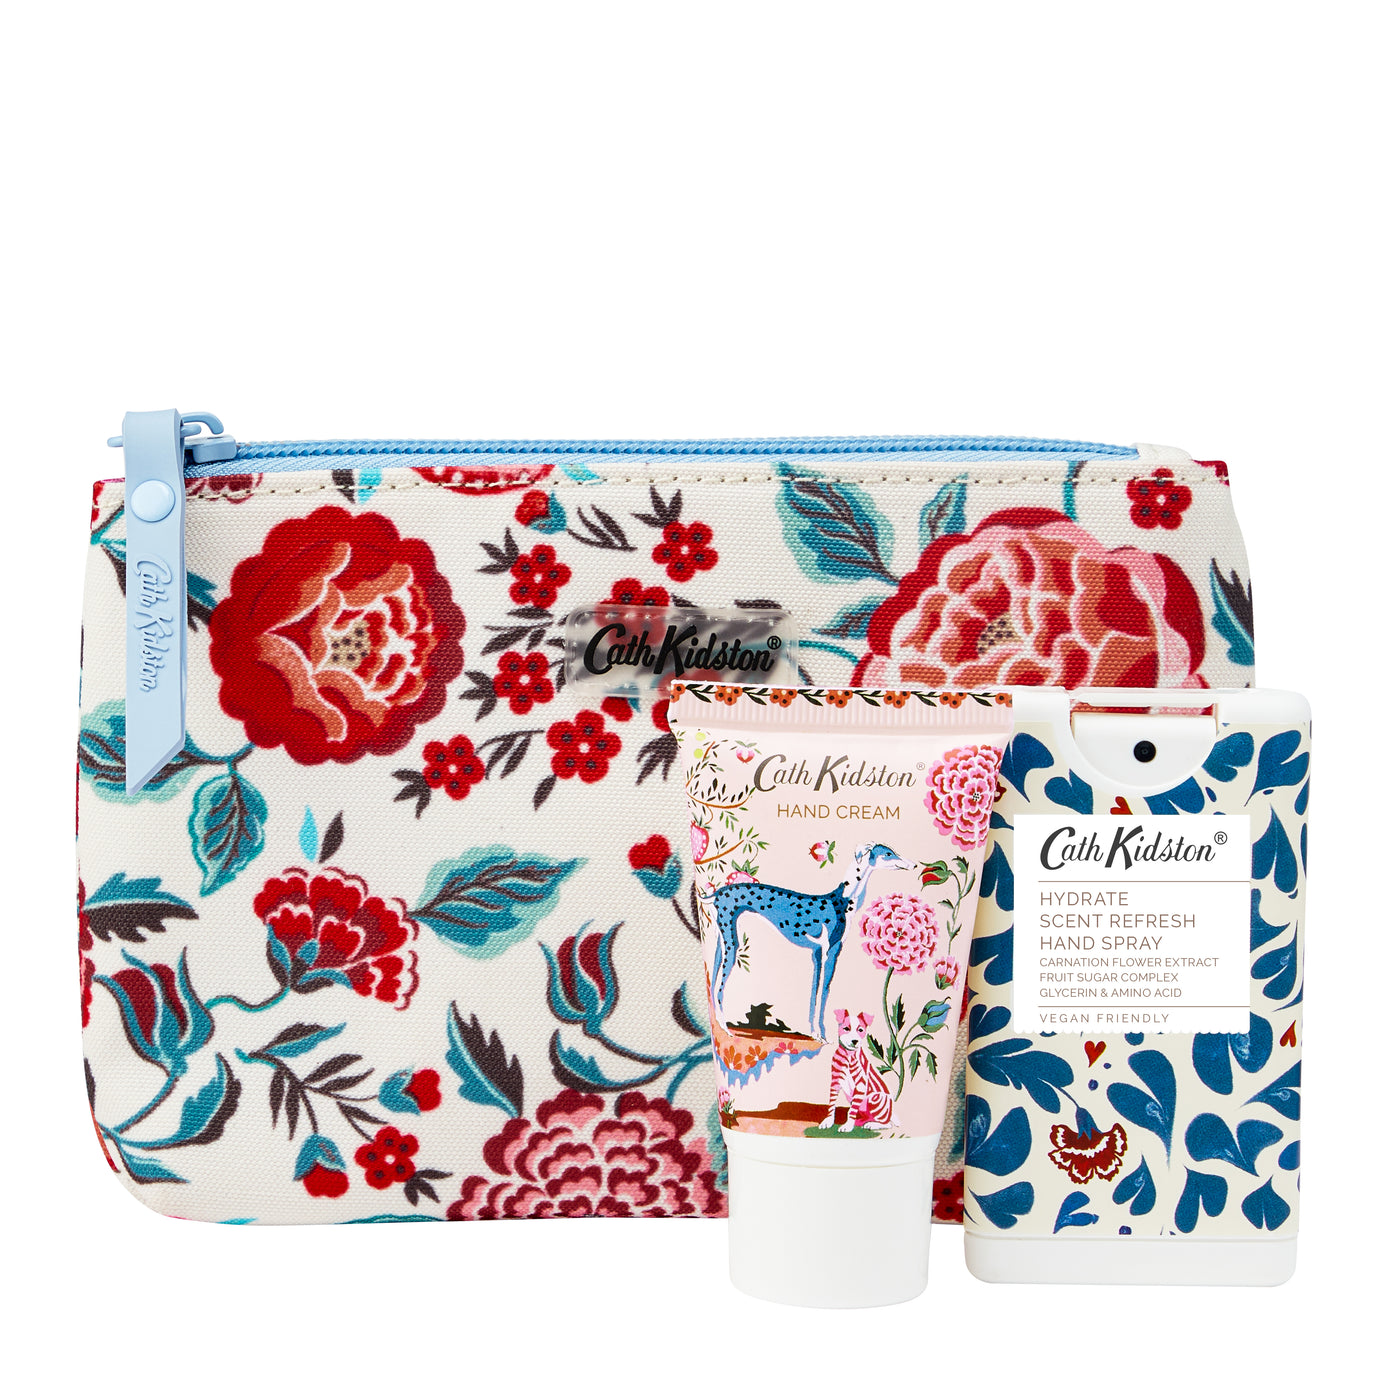 The Artist’s Kingdom Cosmetic Pouch